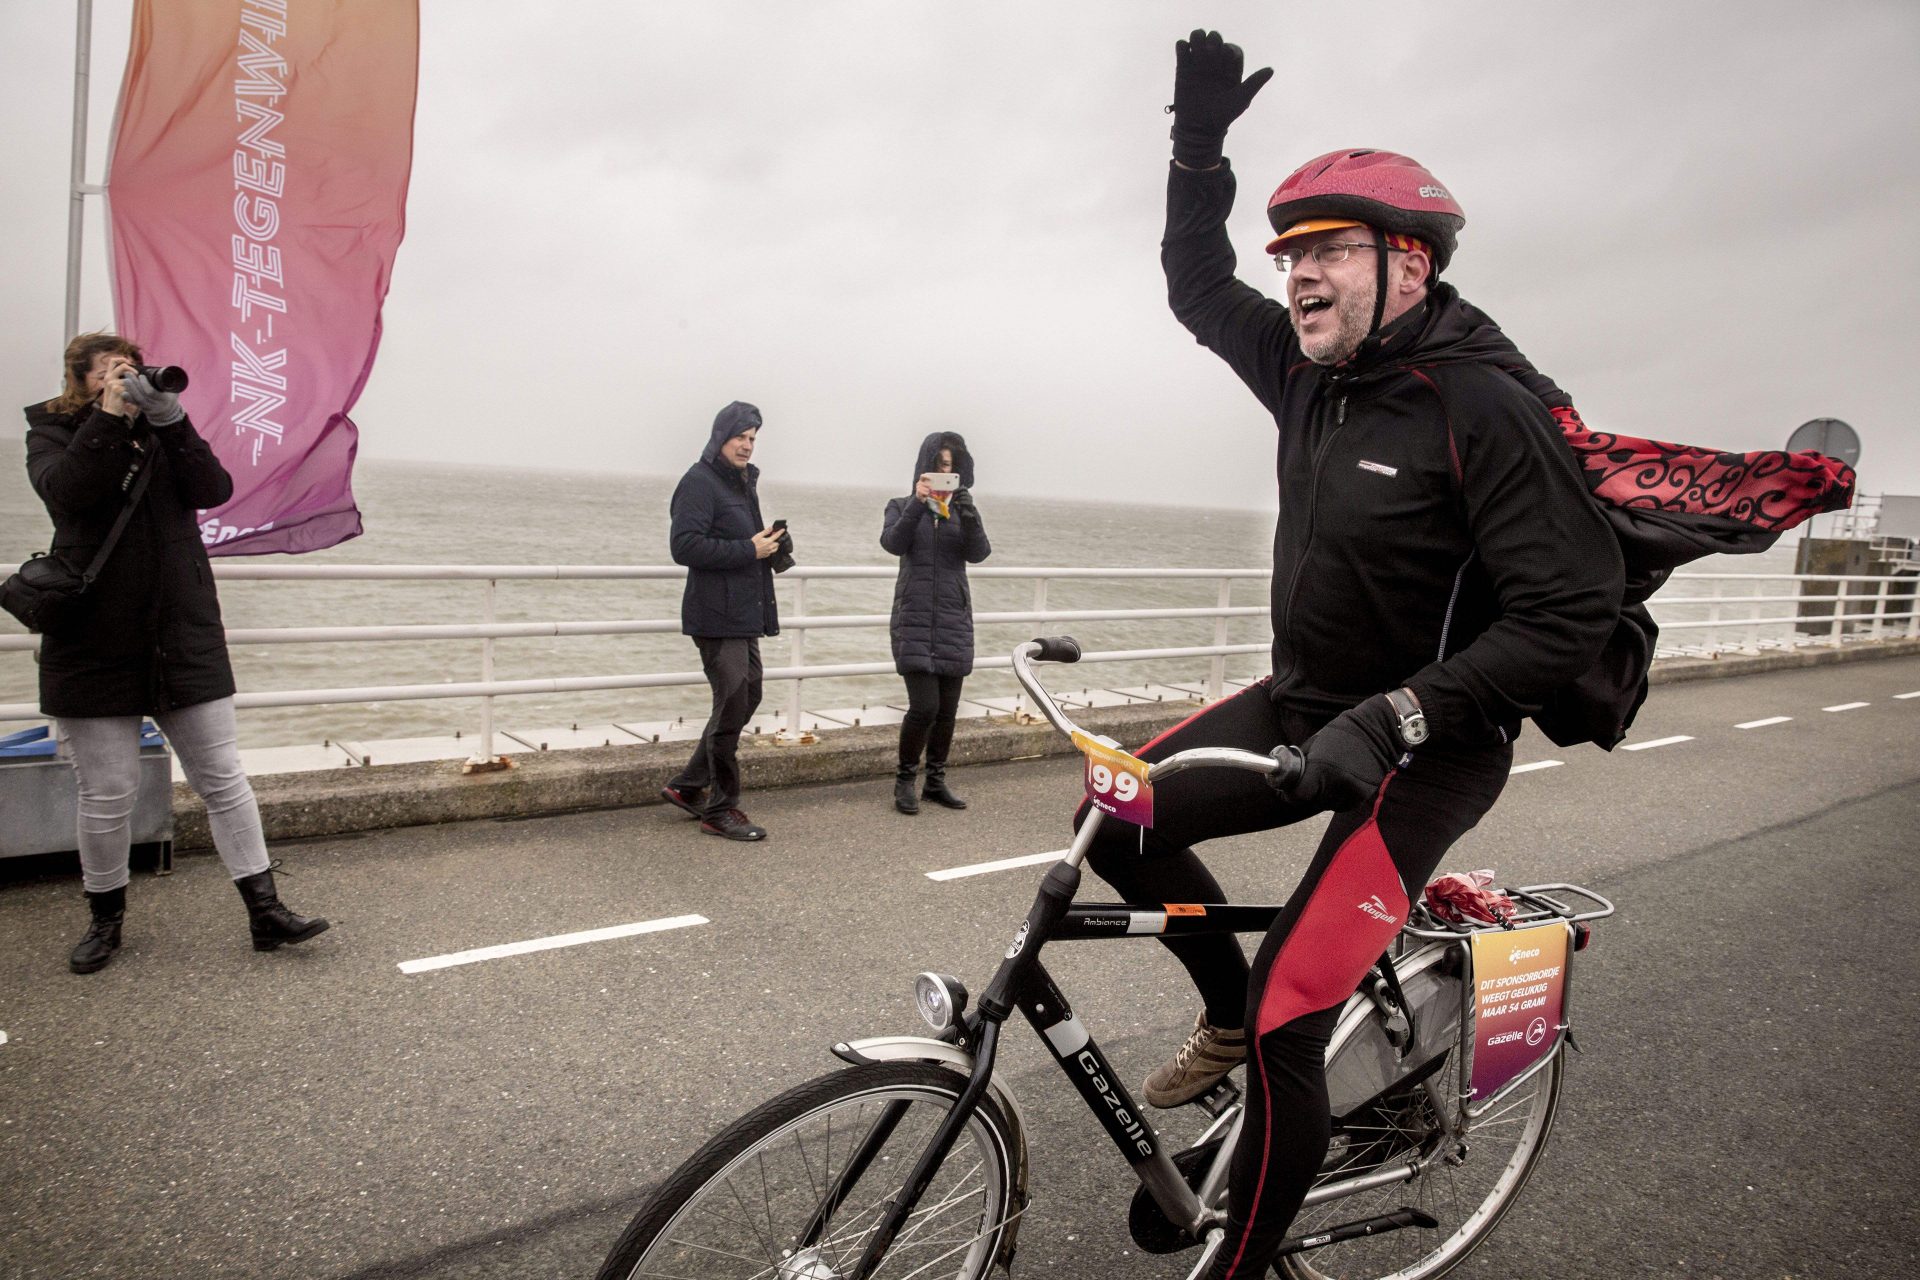 Bizarre: Dutch Headwind Cycling Championships cancelled due to ... too much wind